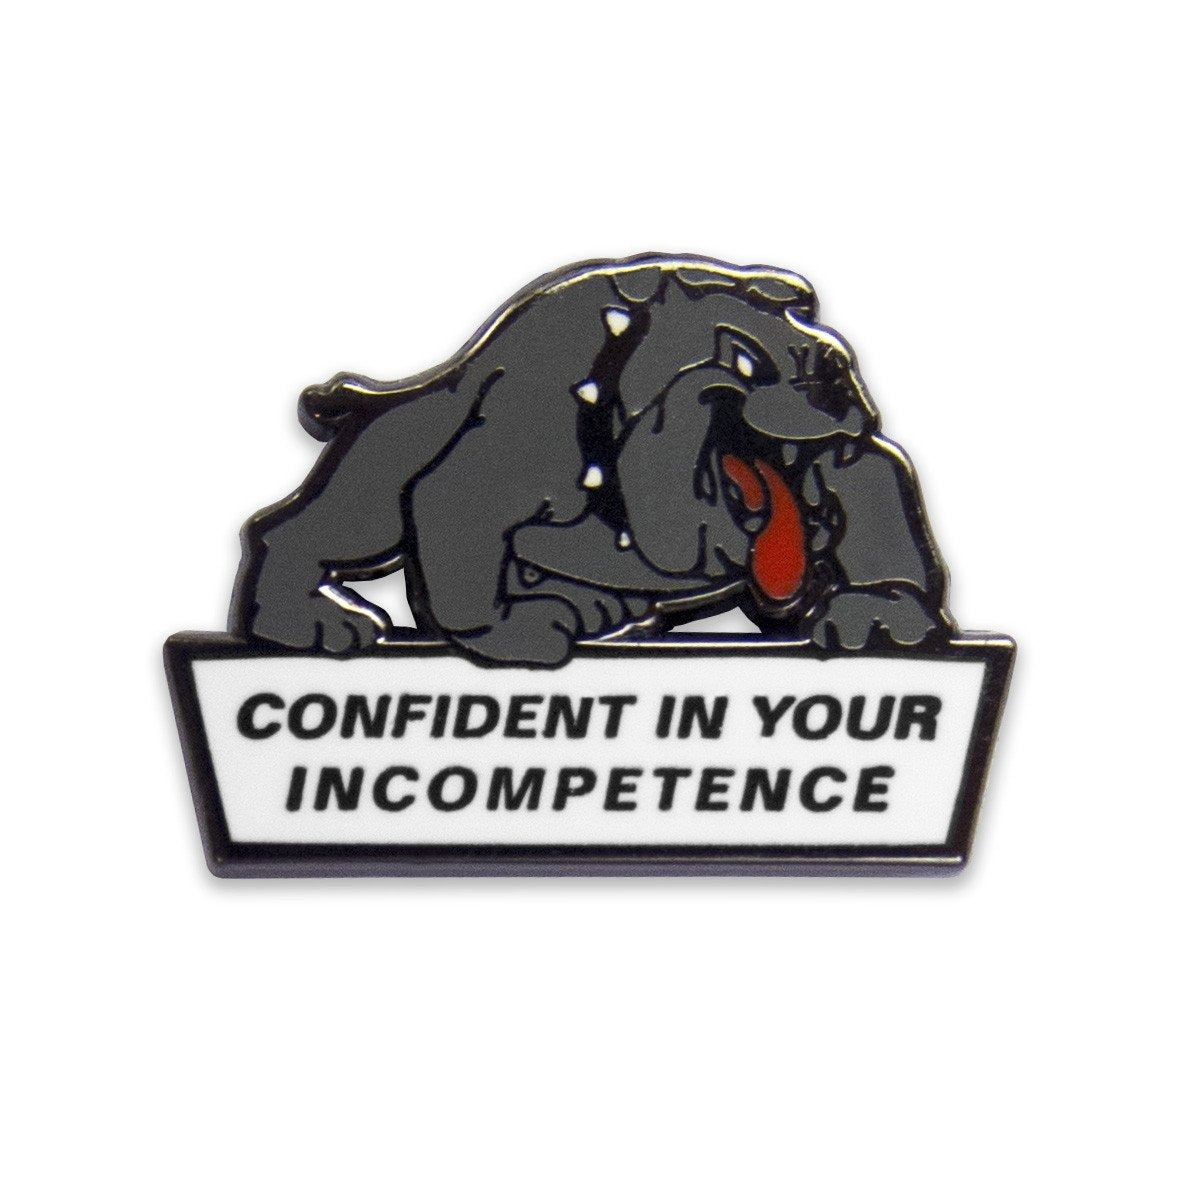 "Confident in your Incompetence" bulldog enamel lapel pin.